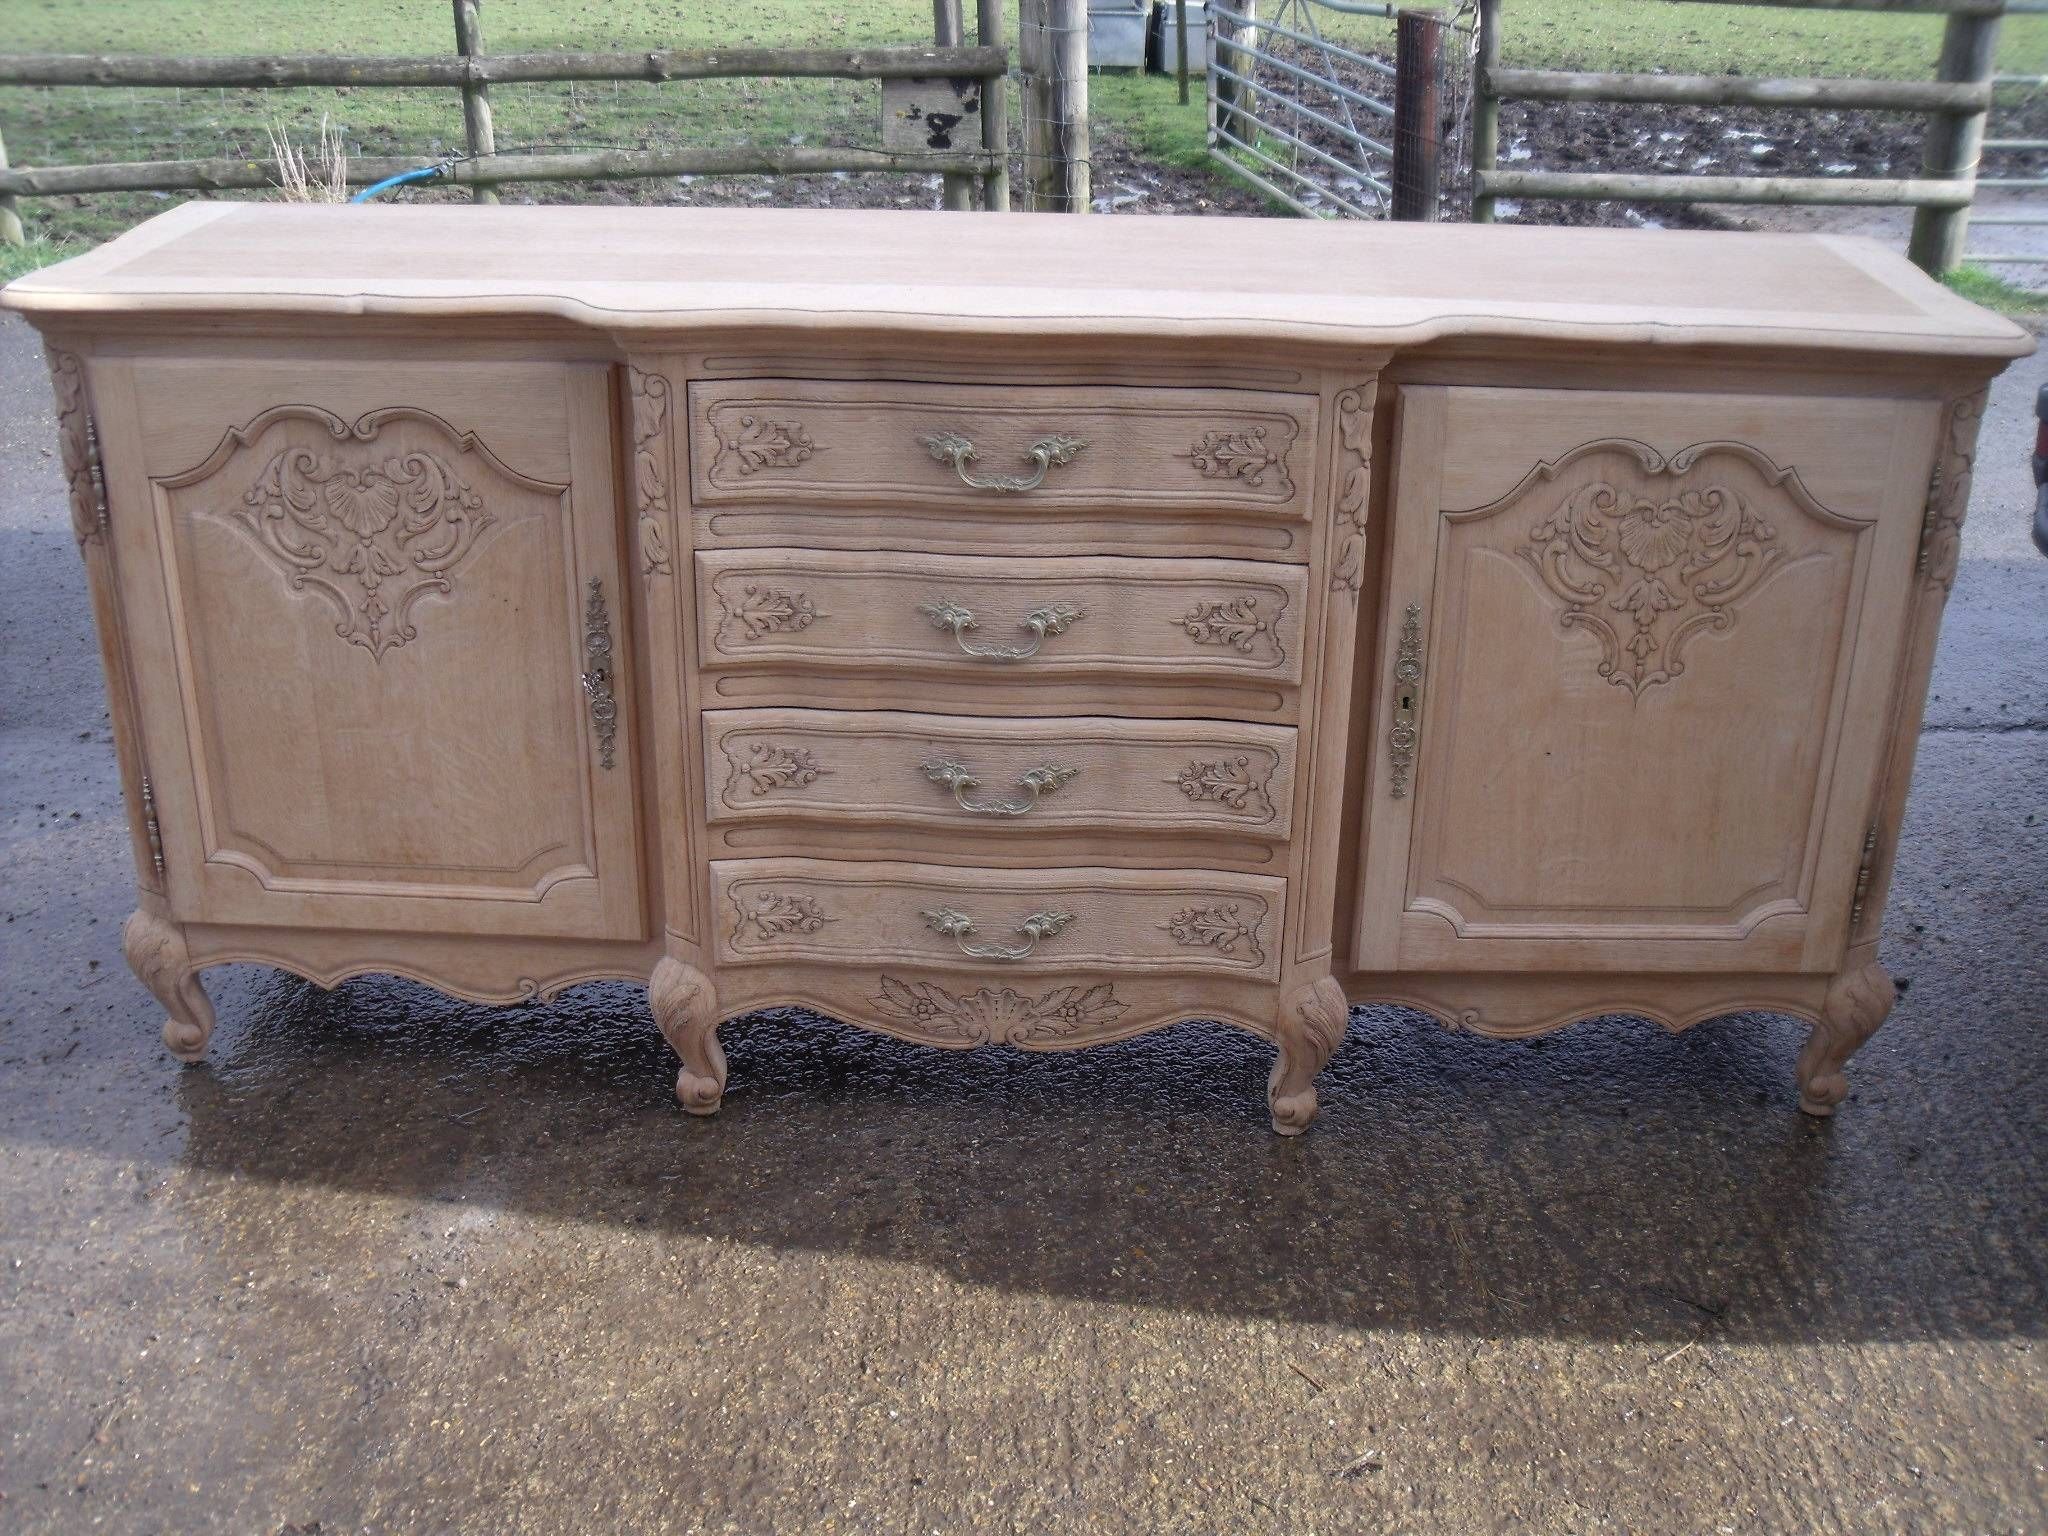 Large French Louis Xv Style Natural Oak Carved Sideboard | Antique Pertaining To Most Recently Released French Sideboards (View 4 of 15)